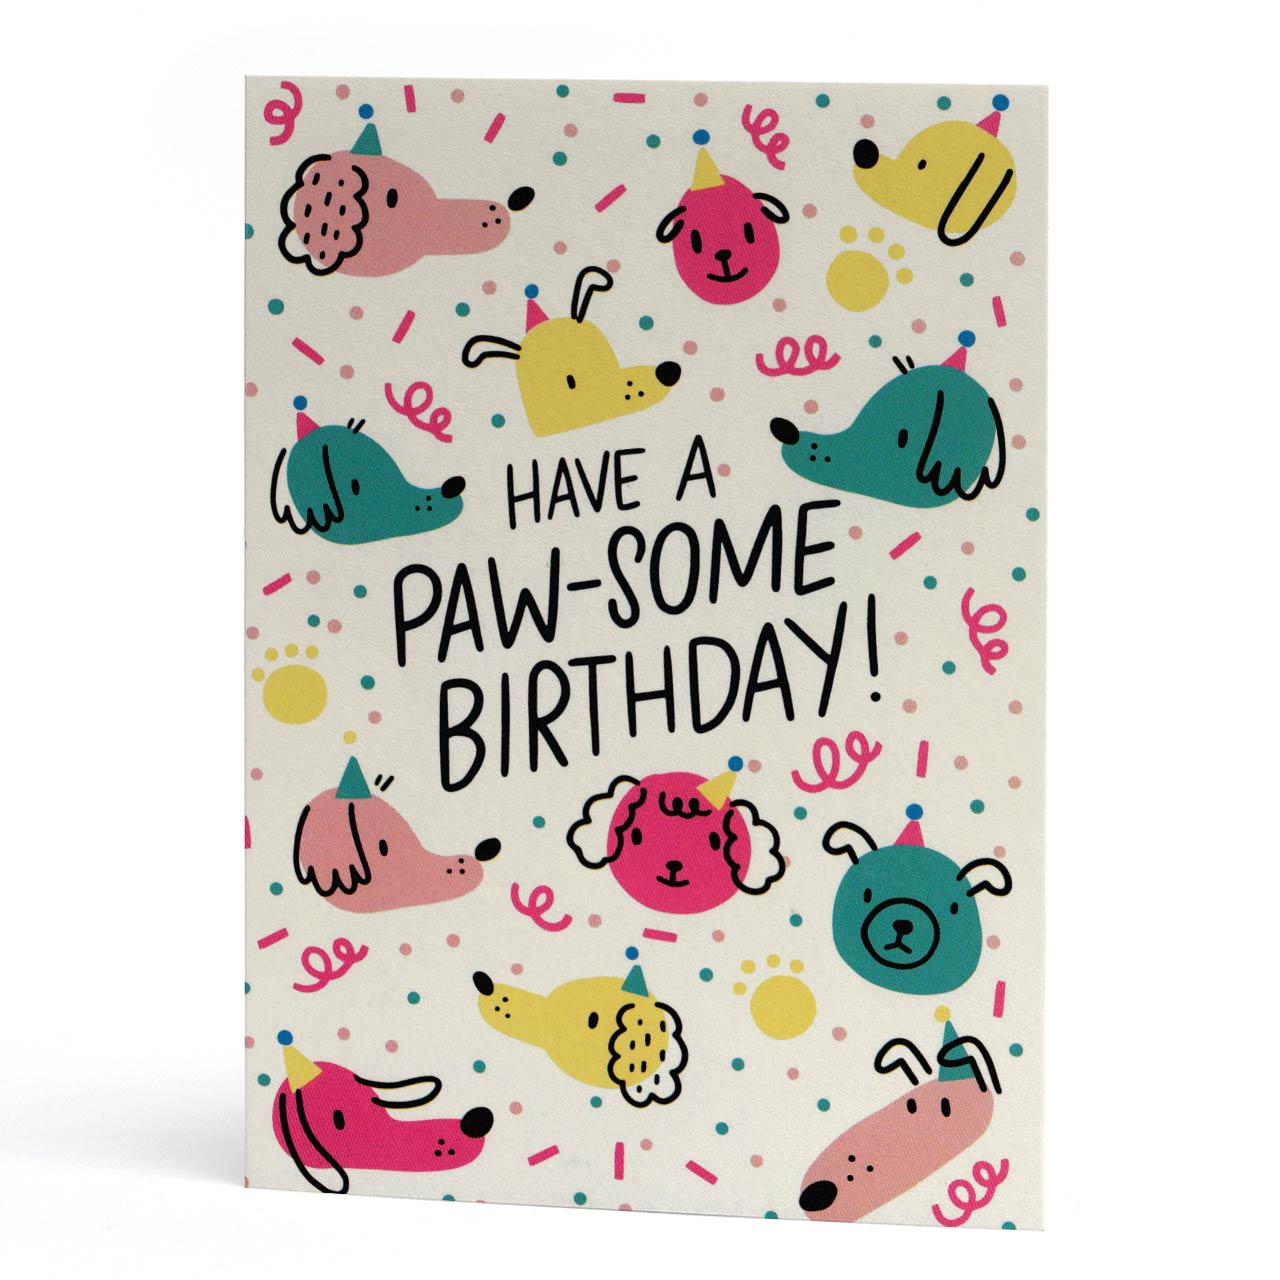 Have a Pawsome Birthday Neon Greeting Card